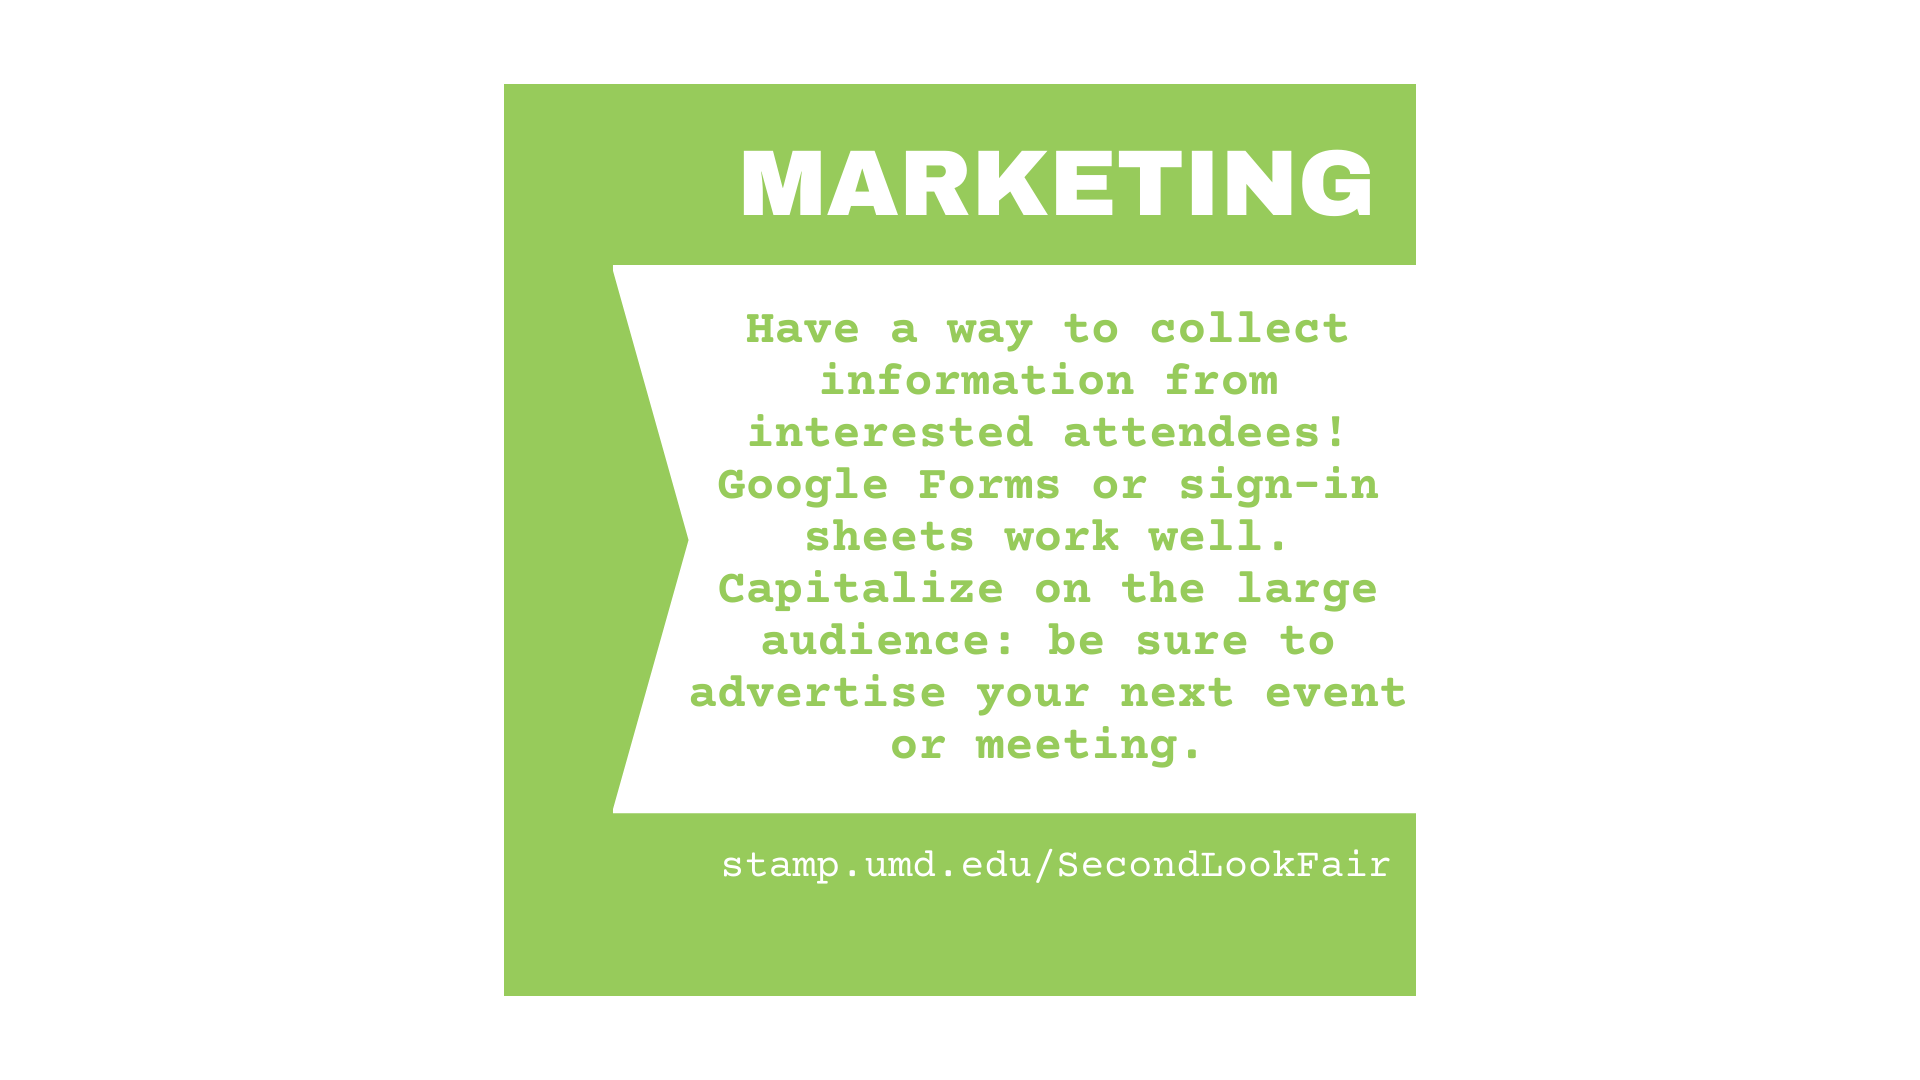 Have a way to collect information from interested attendees. Capitalize on the large audience and advertise your next event.